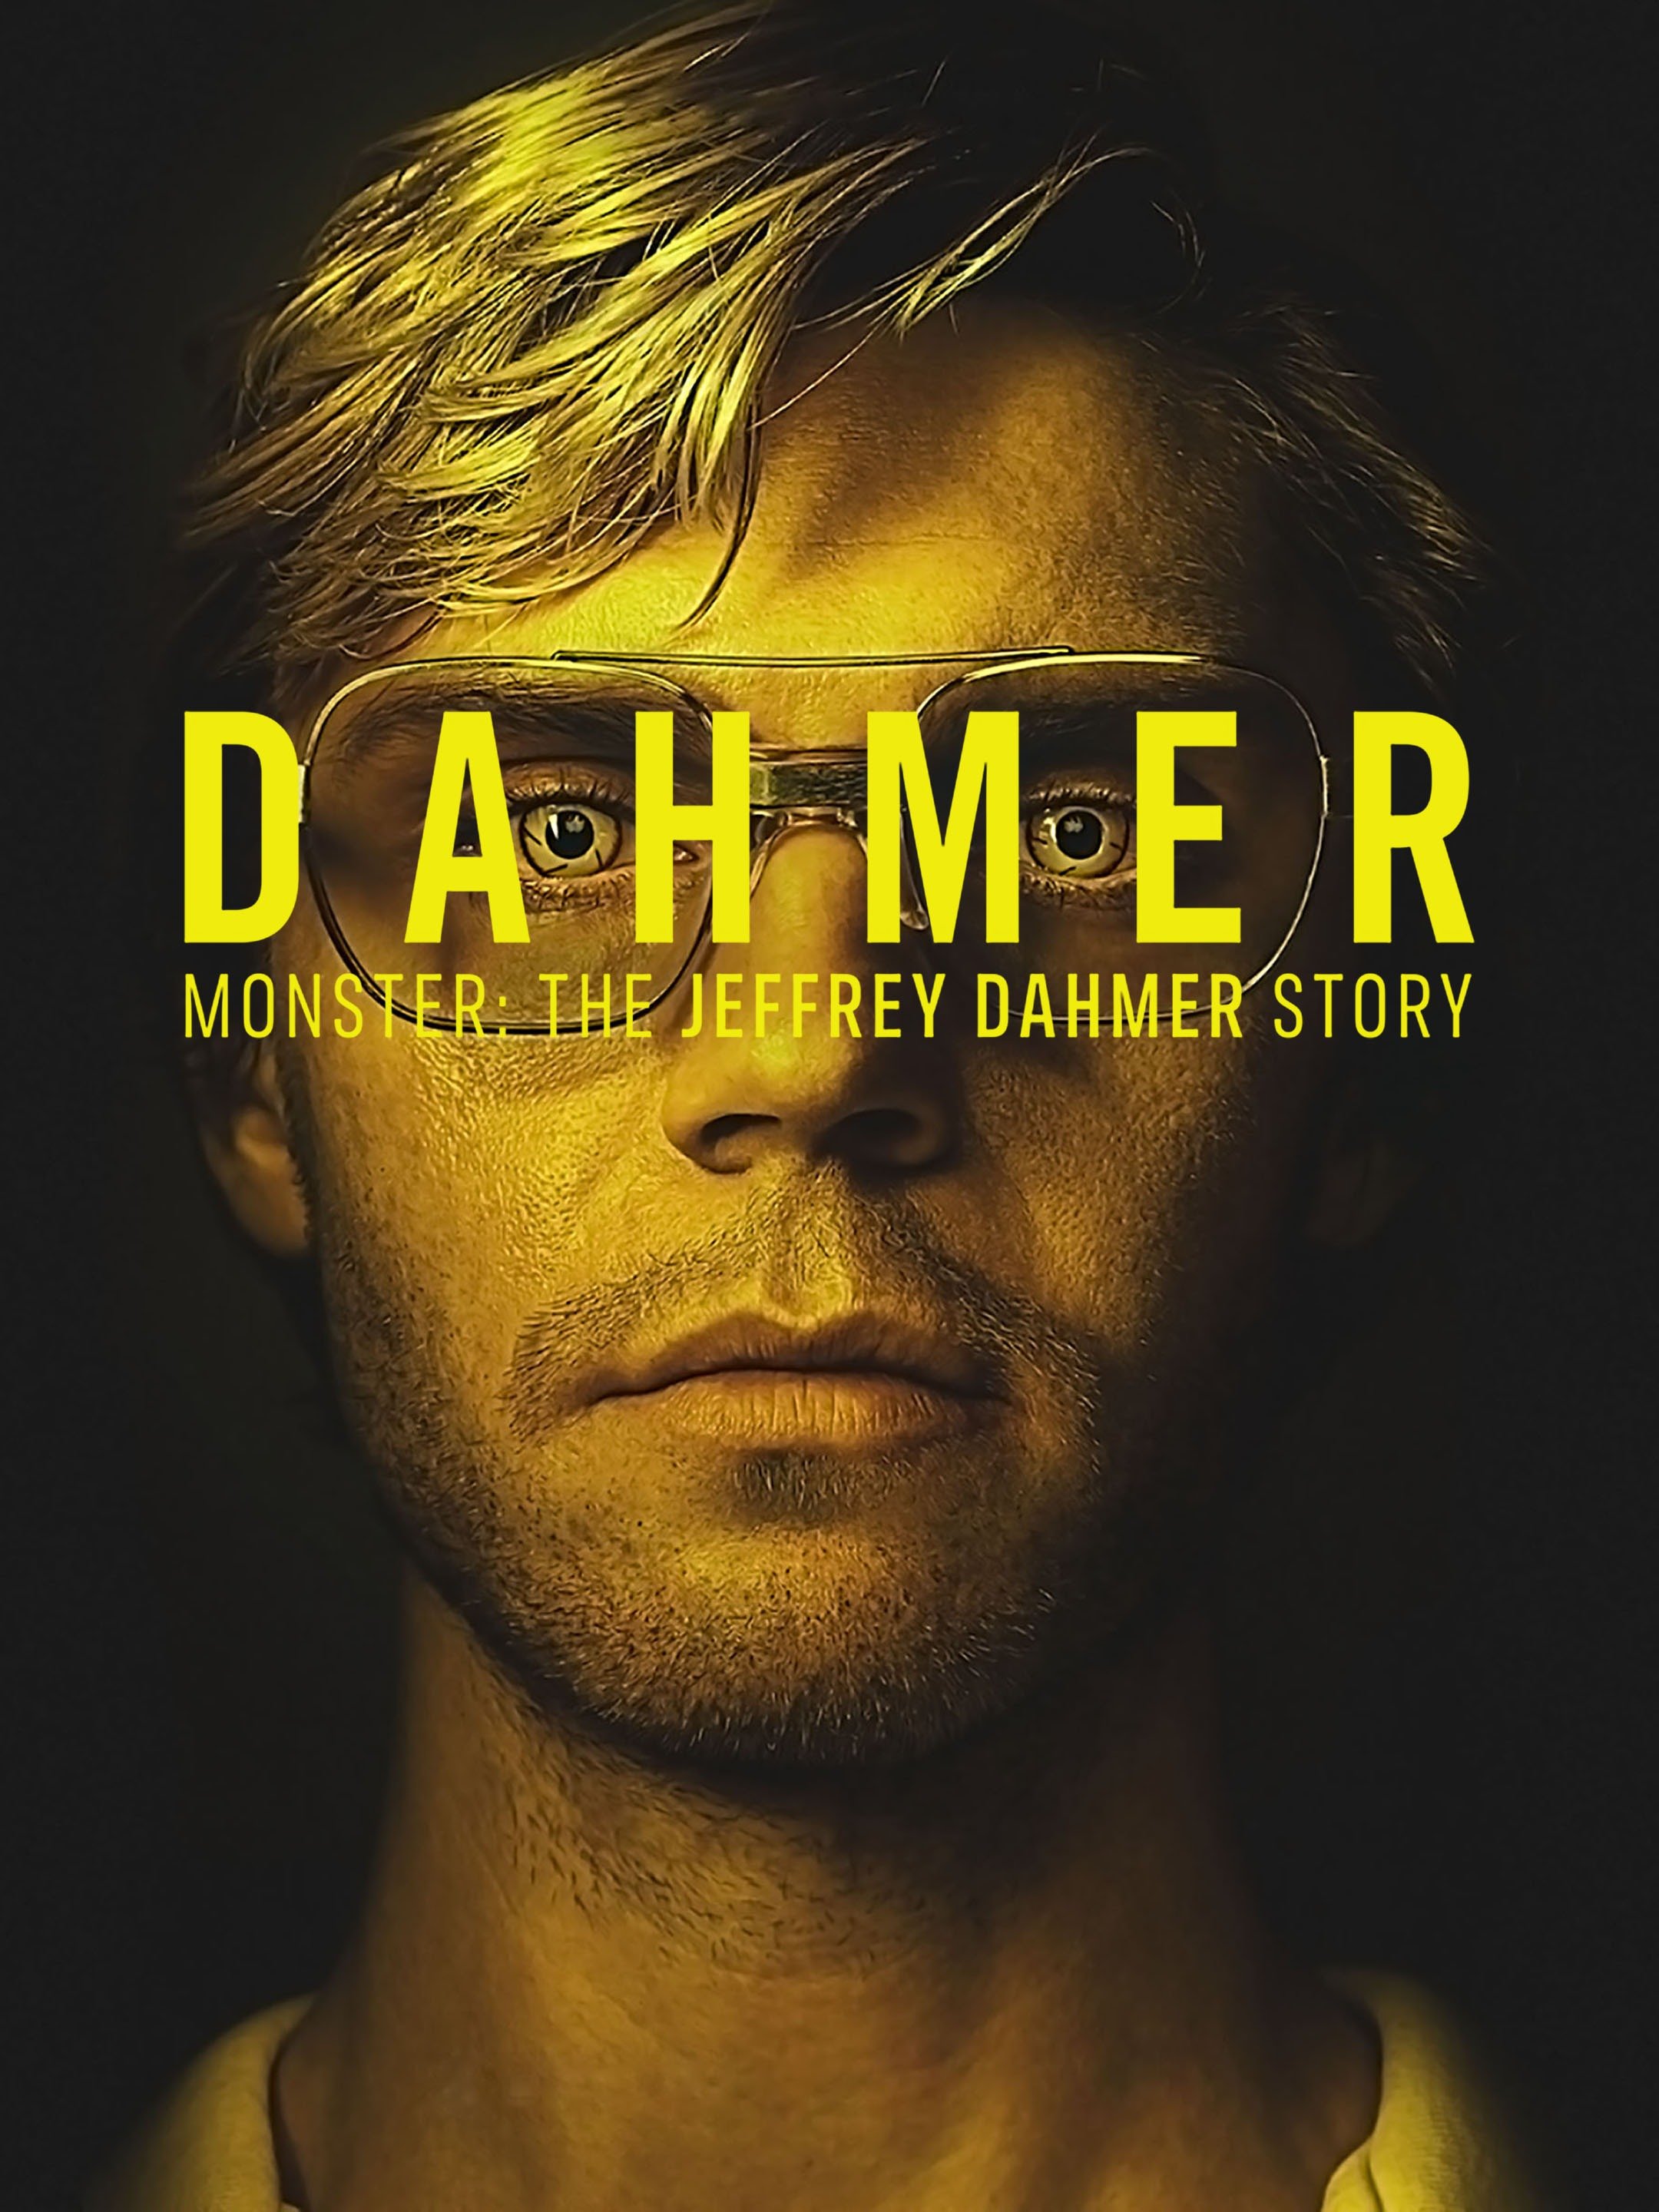 Dahmer -- Monster: The Jeffrey Dahmer Story - Rotten Tomatoes